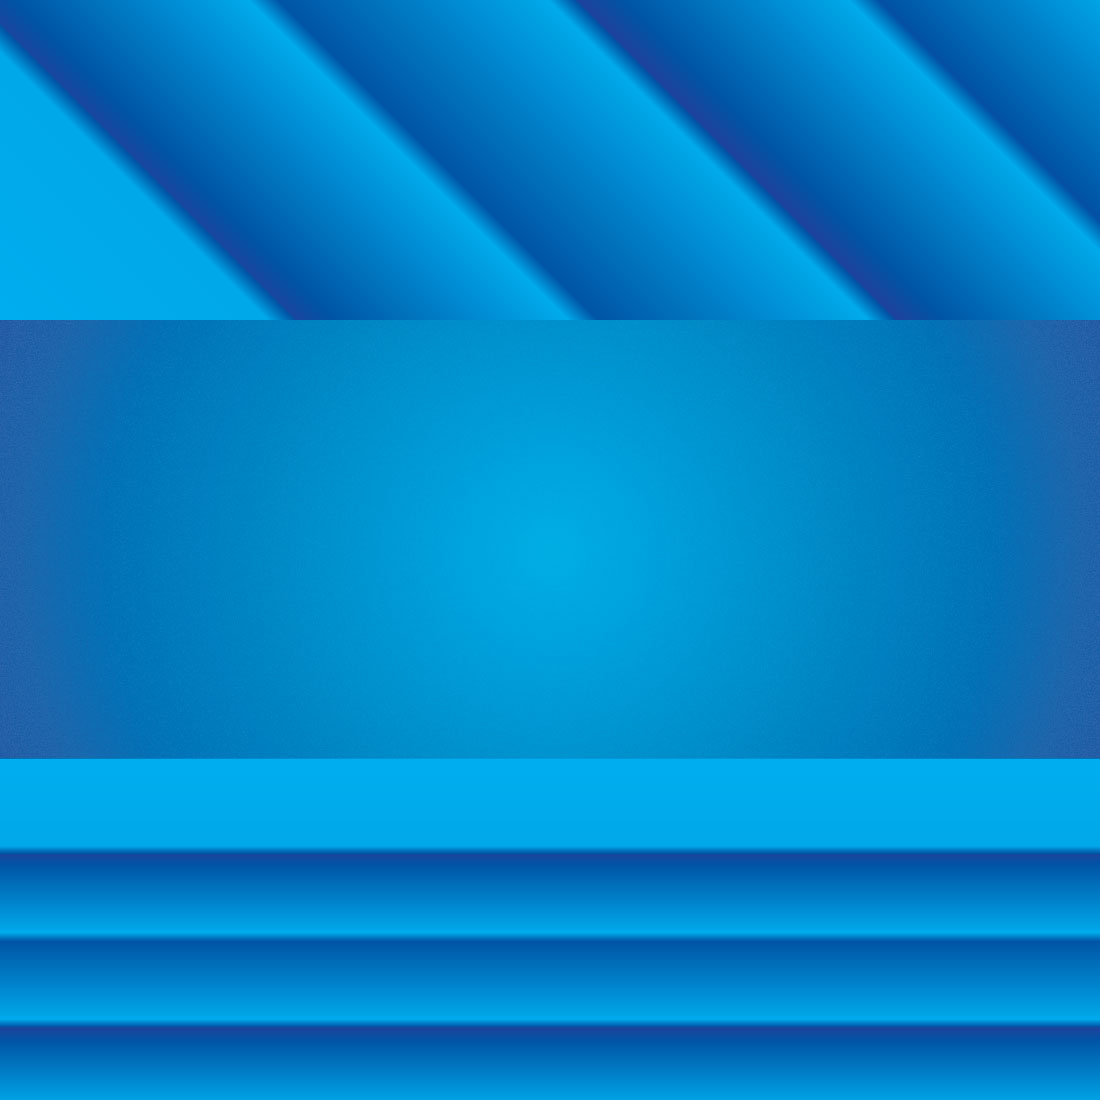 10 Cool Blue Gradient Background cover image.